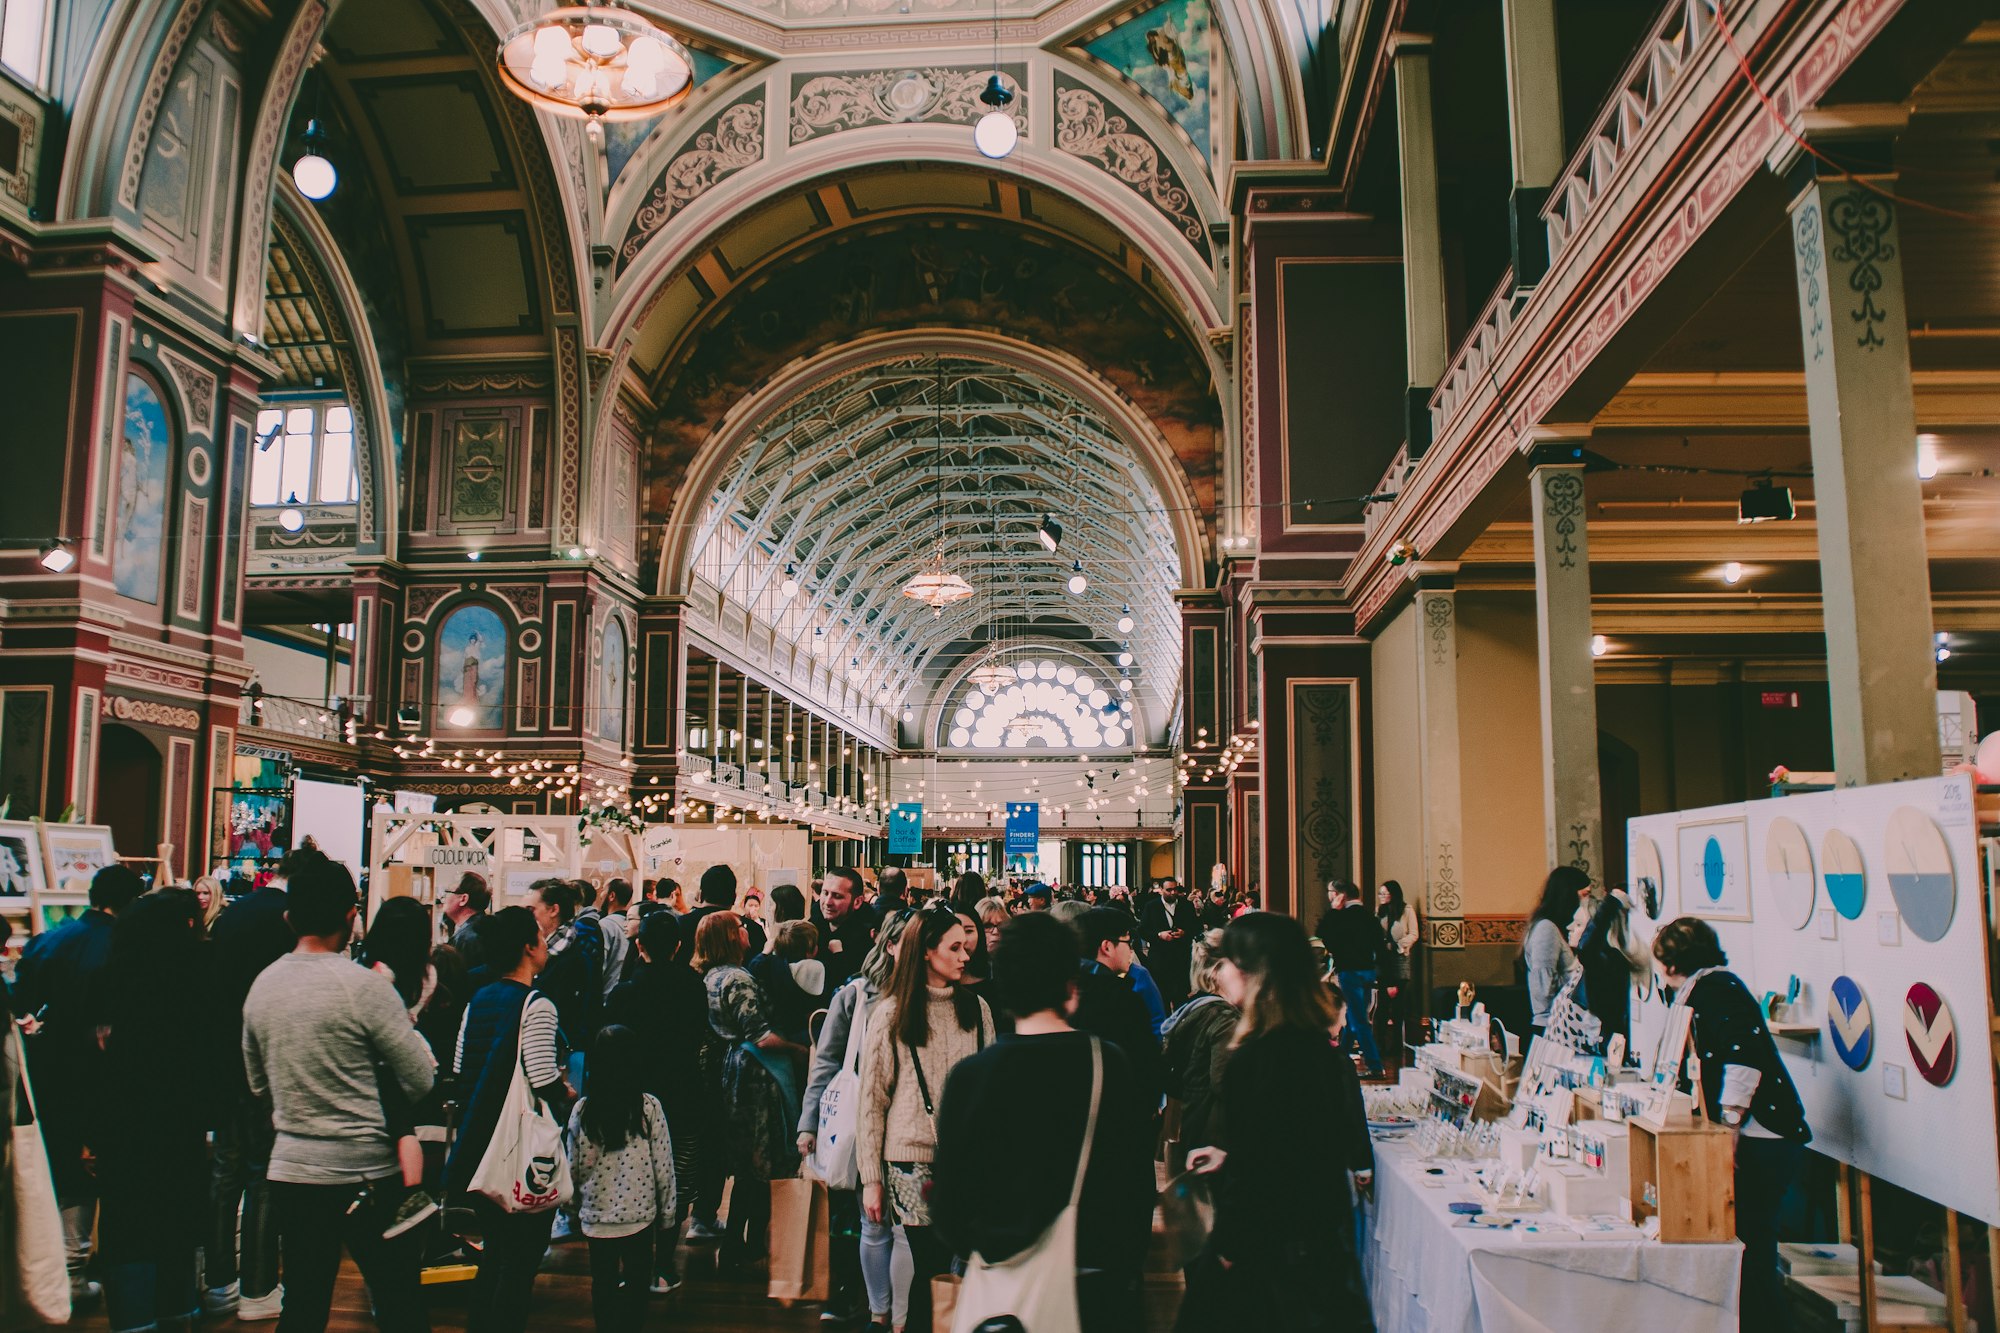 went to the finders keepers market in carlton on the 22nd of october , run by frankie magazine

reached unsplash   H O M E   page   7 / 12 / 17